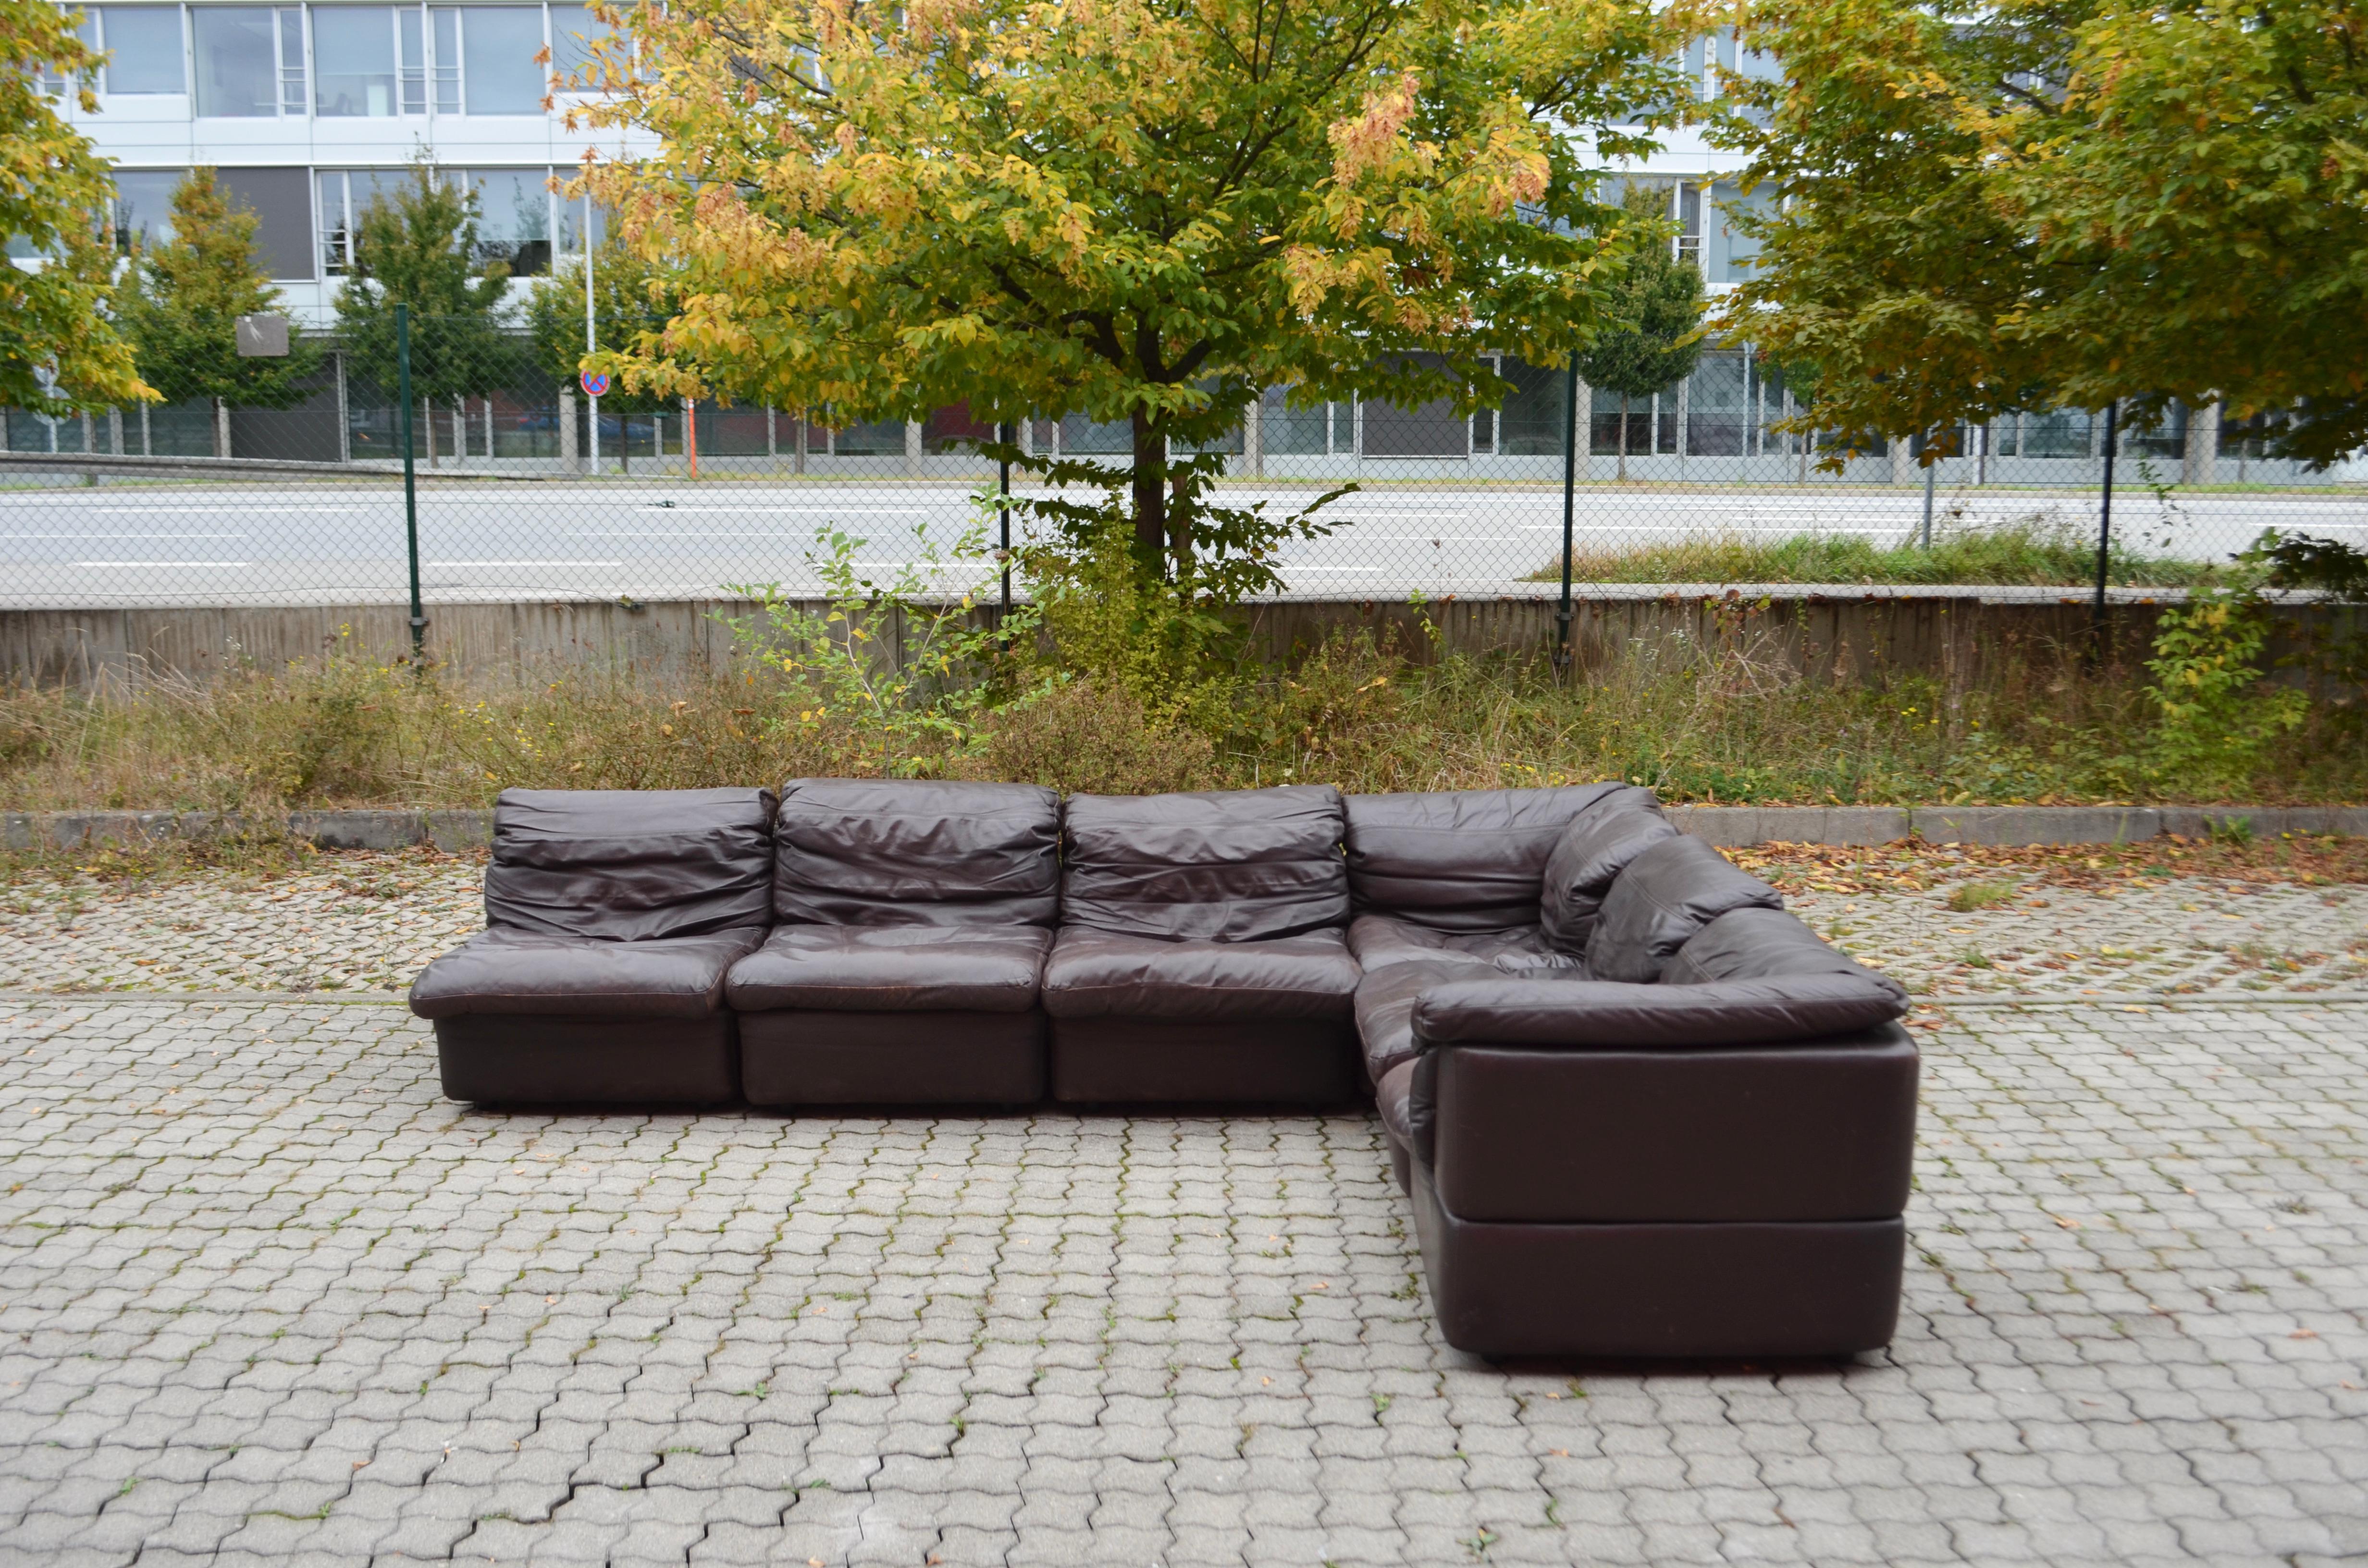 brown leather modular sectional